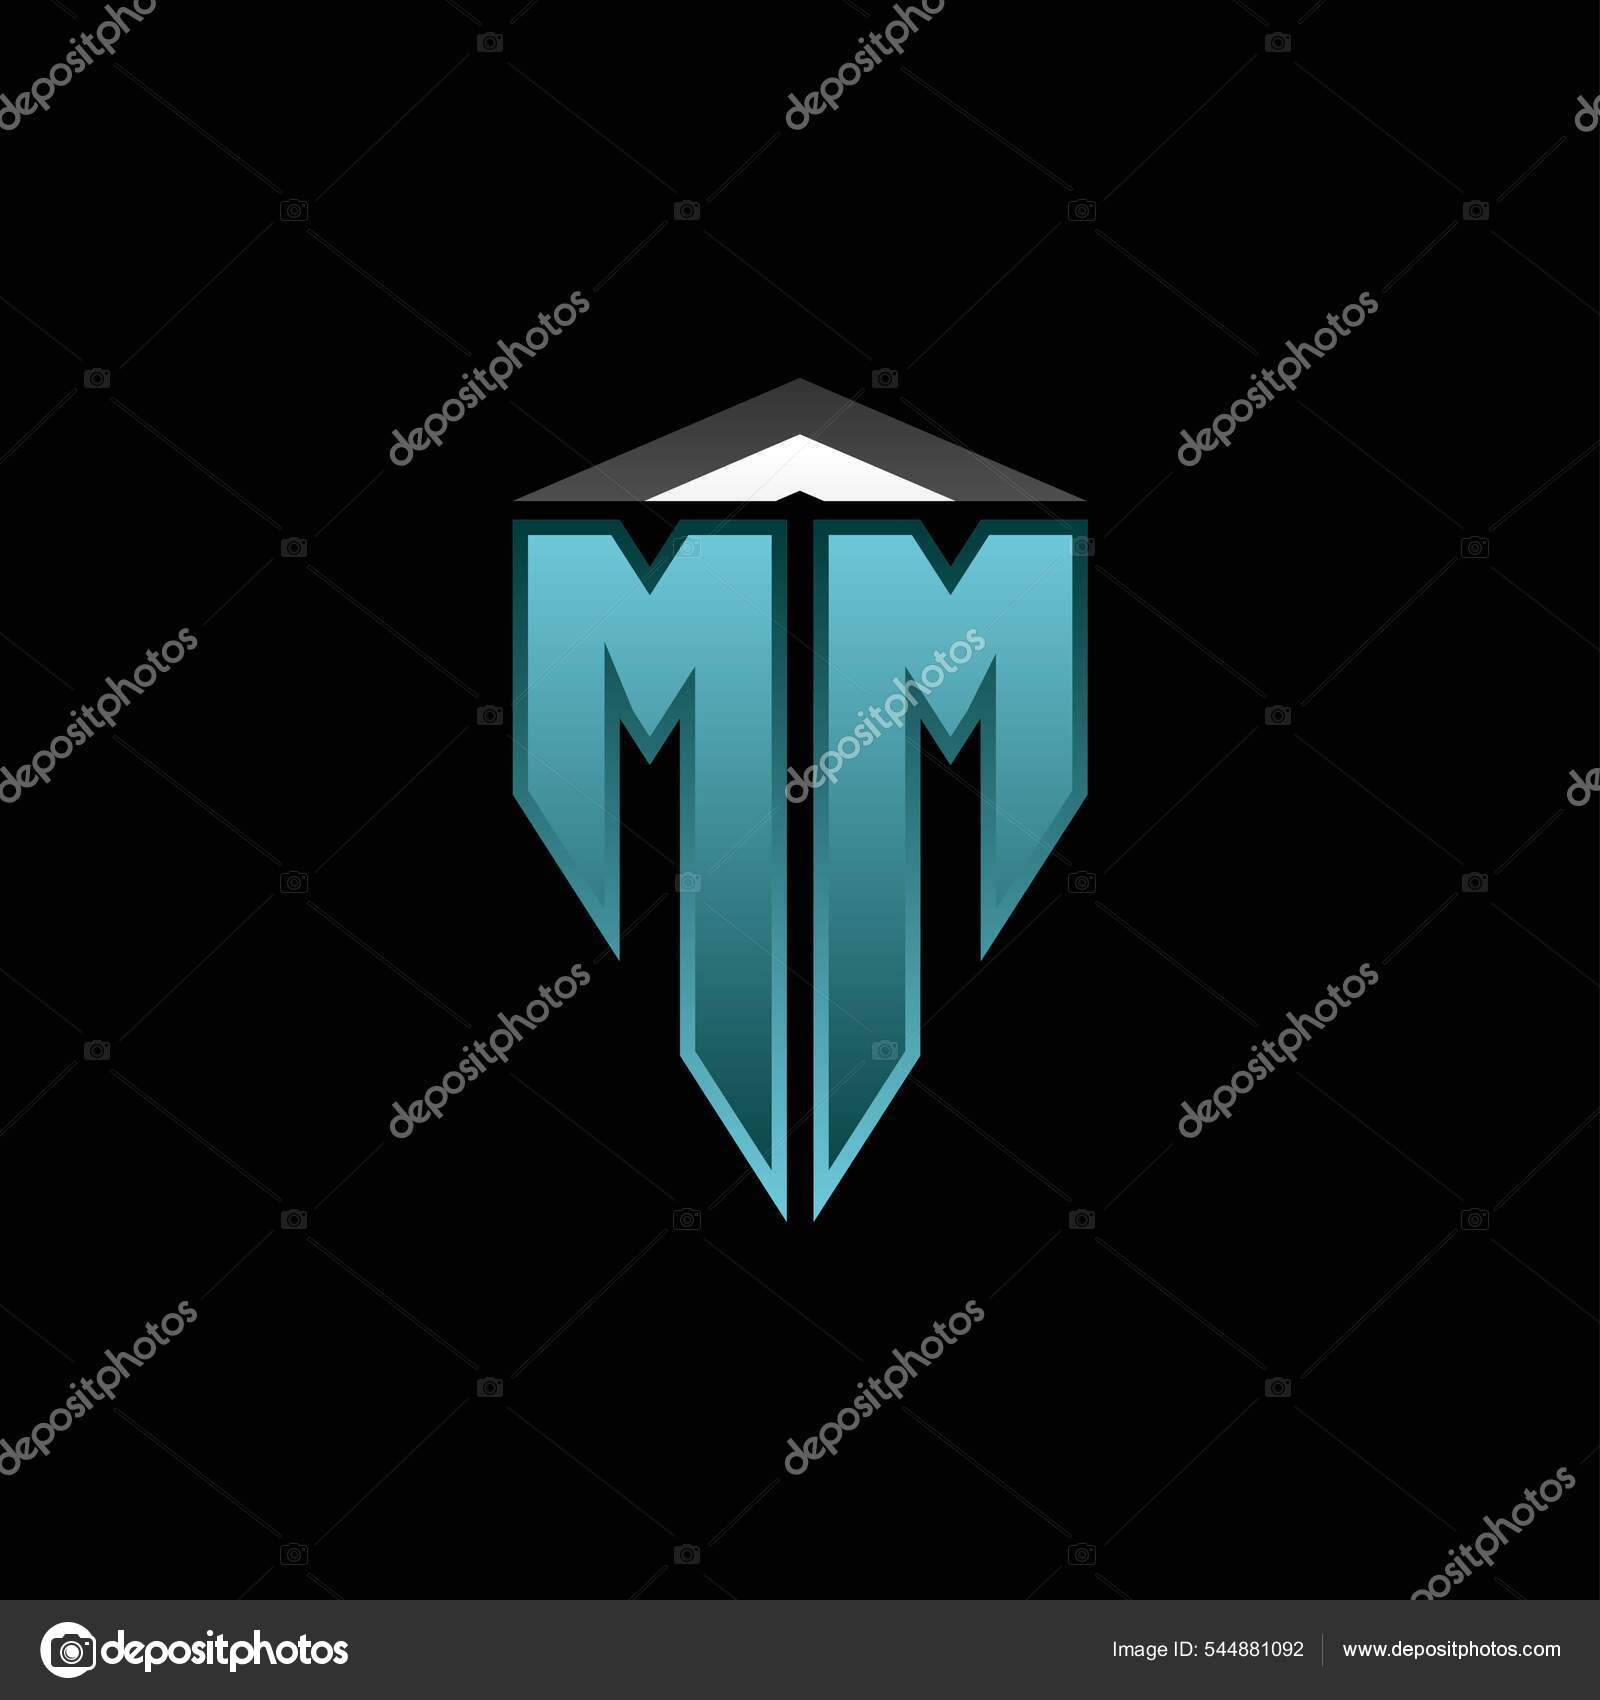 Mm Monogram Vector Images (over 2,000)